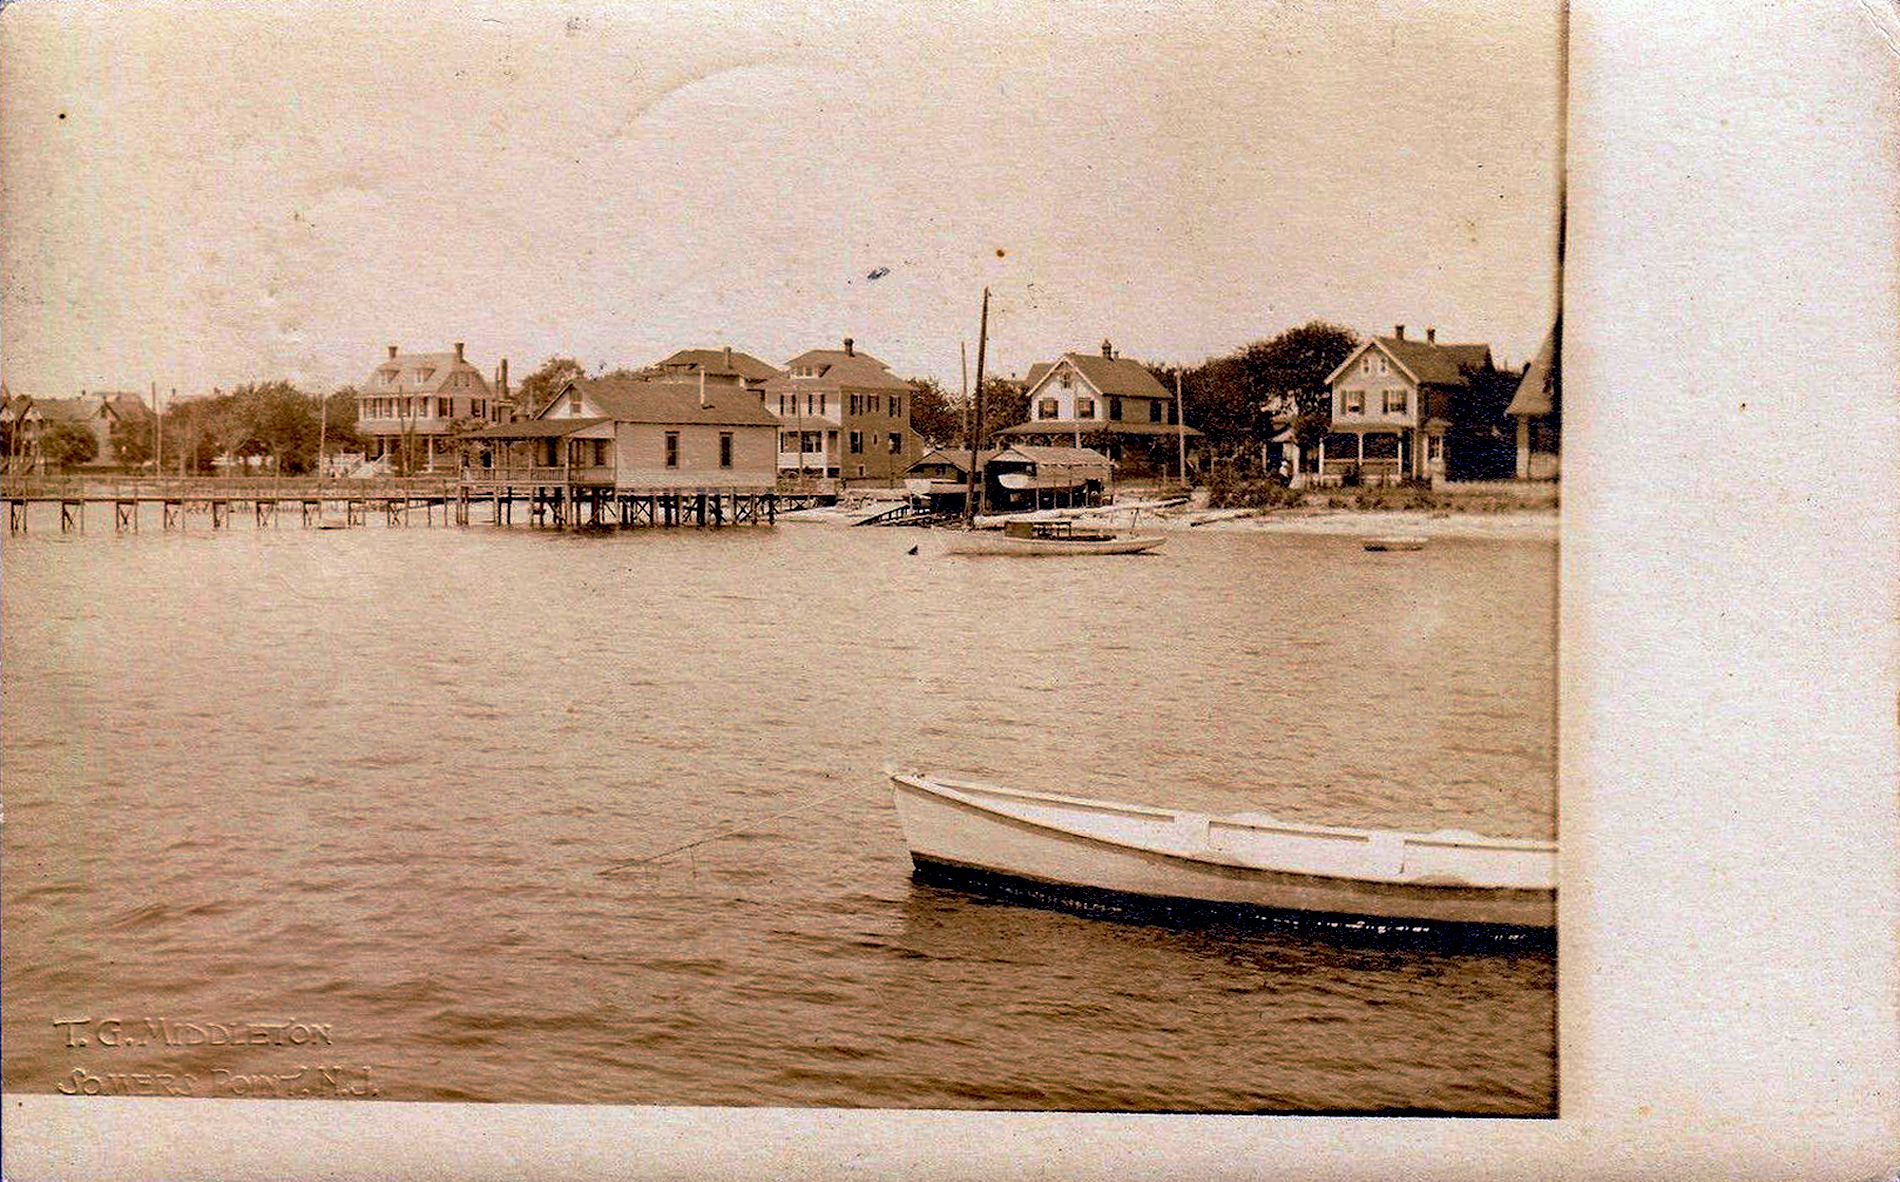 Somers Point - Atlantic County - On the waterfront - c 1910